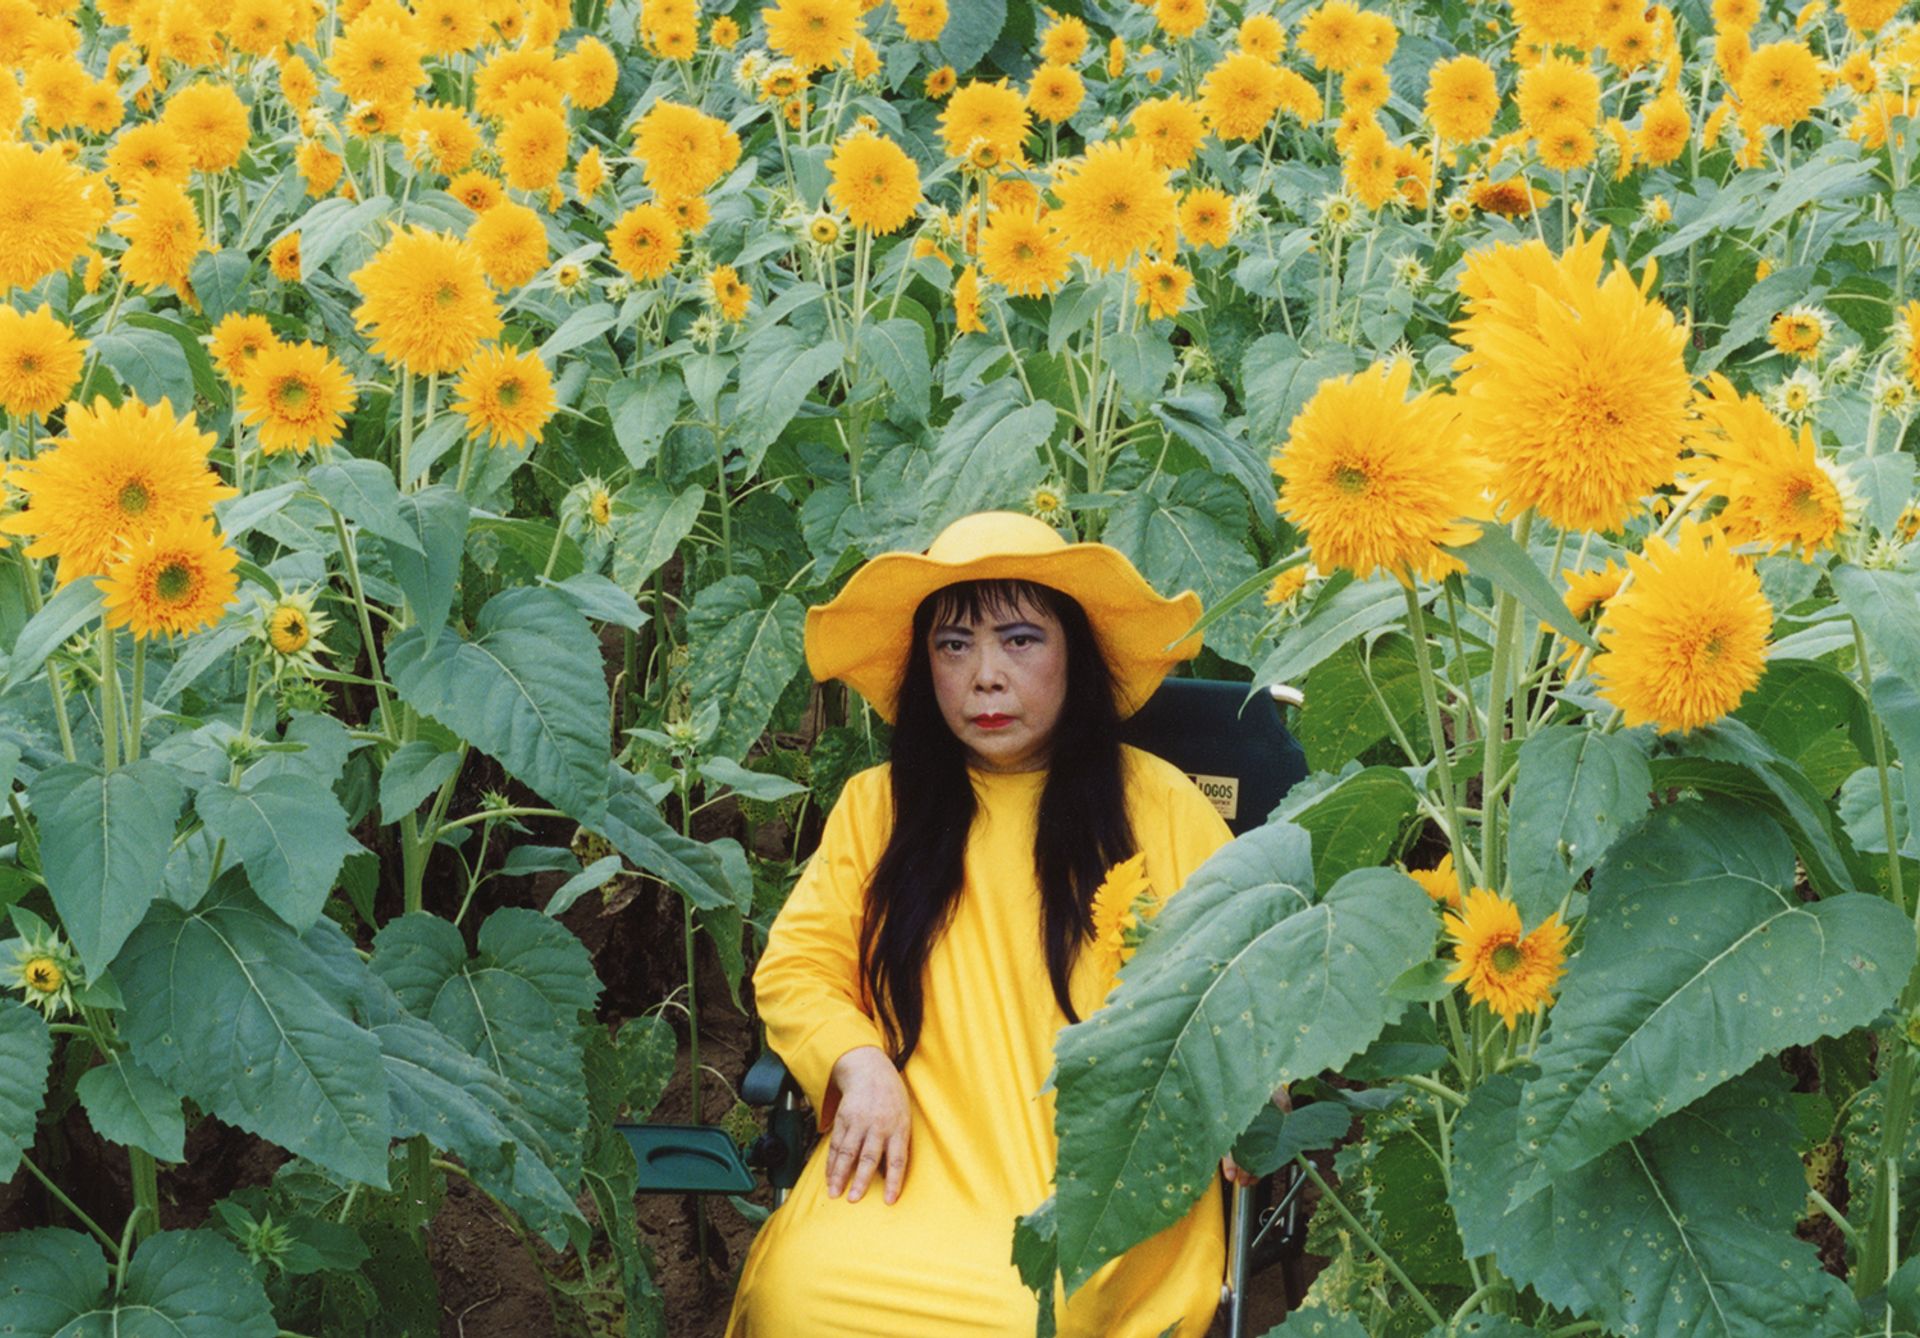 Yayoi Kusama, Flower Obsession (Sunflower) (video still) Collection of the artist and courtesy of the NYBG